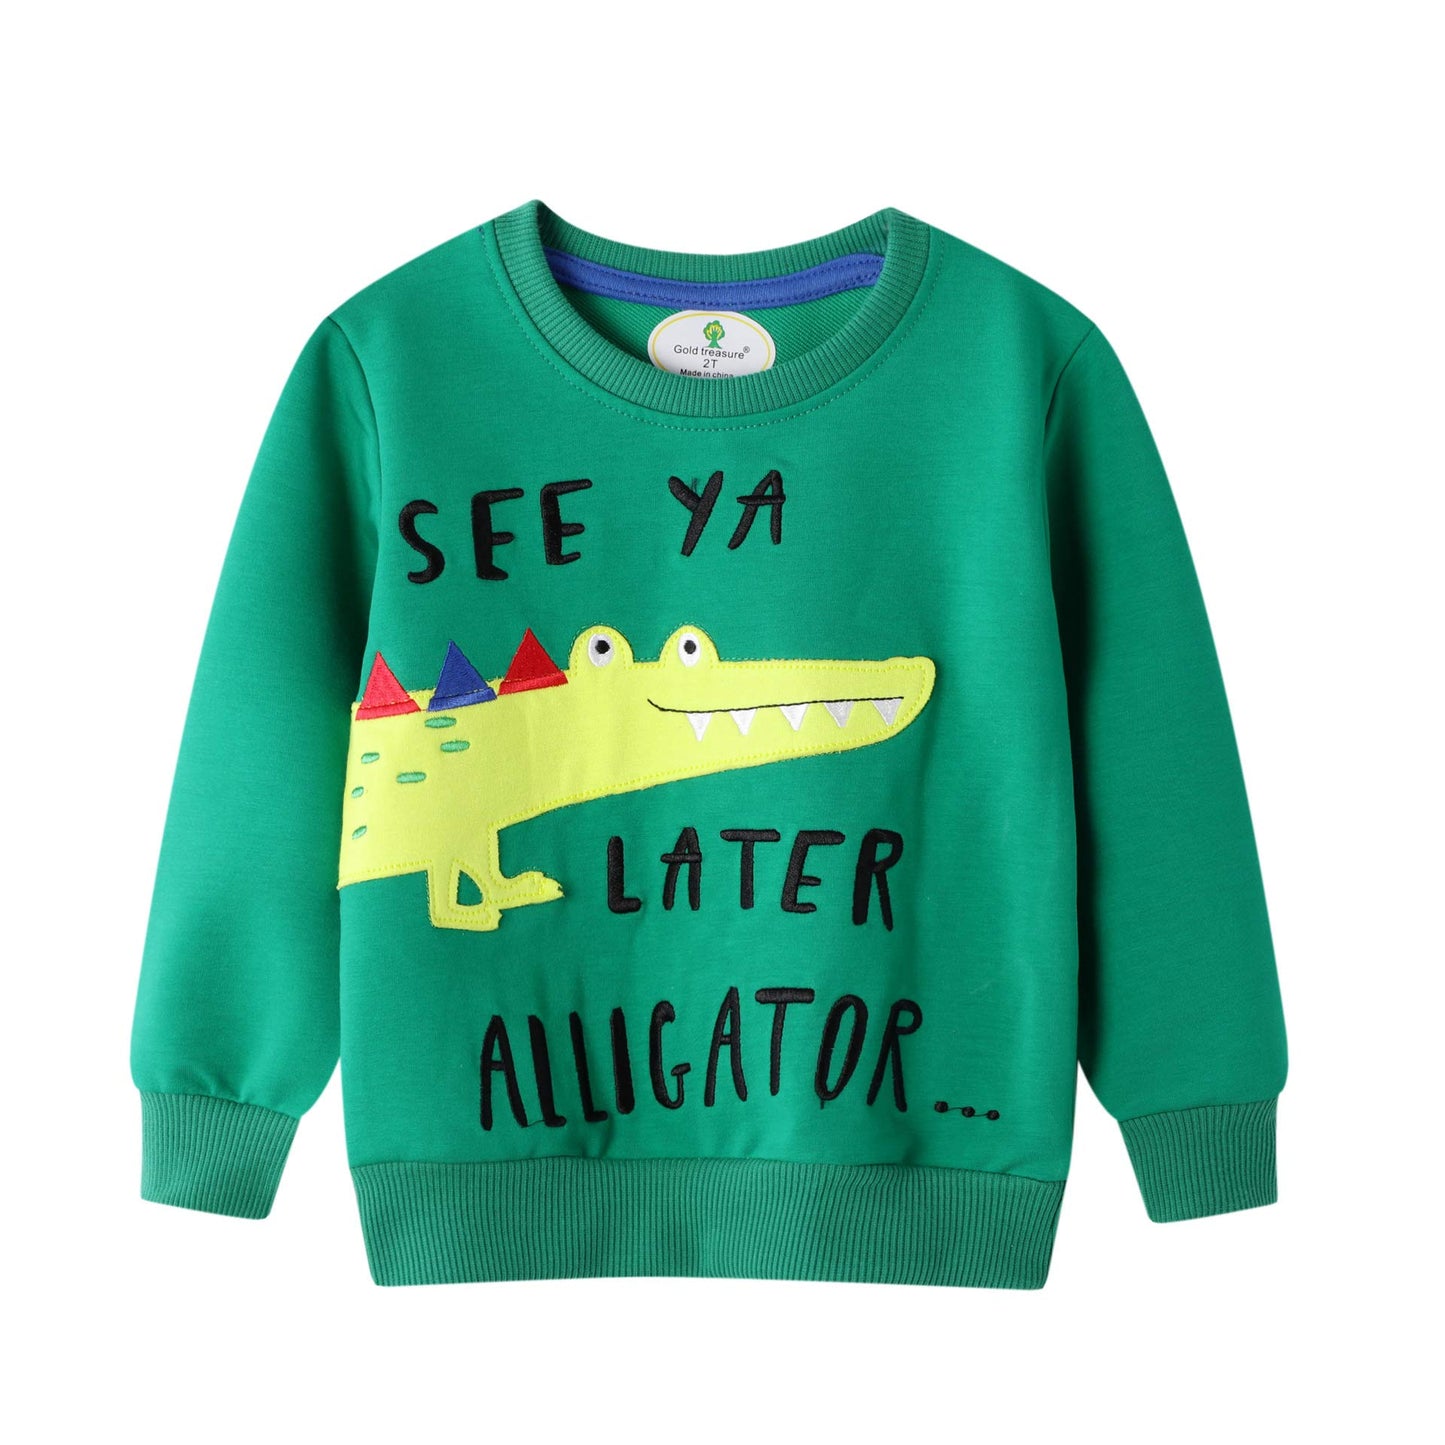 Boys Sweatshirts Elephant Pullover T-Shirts Toddler Cotton Cute Tops Tee Long Sleeve Outdoor Outfit